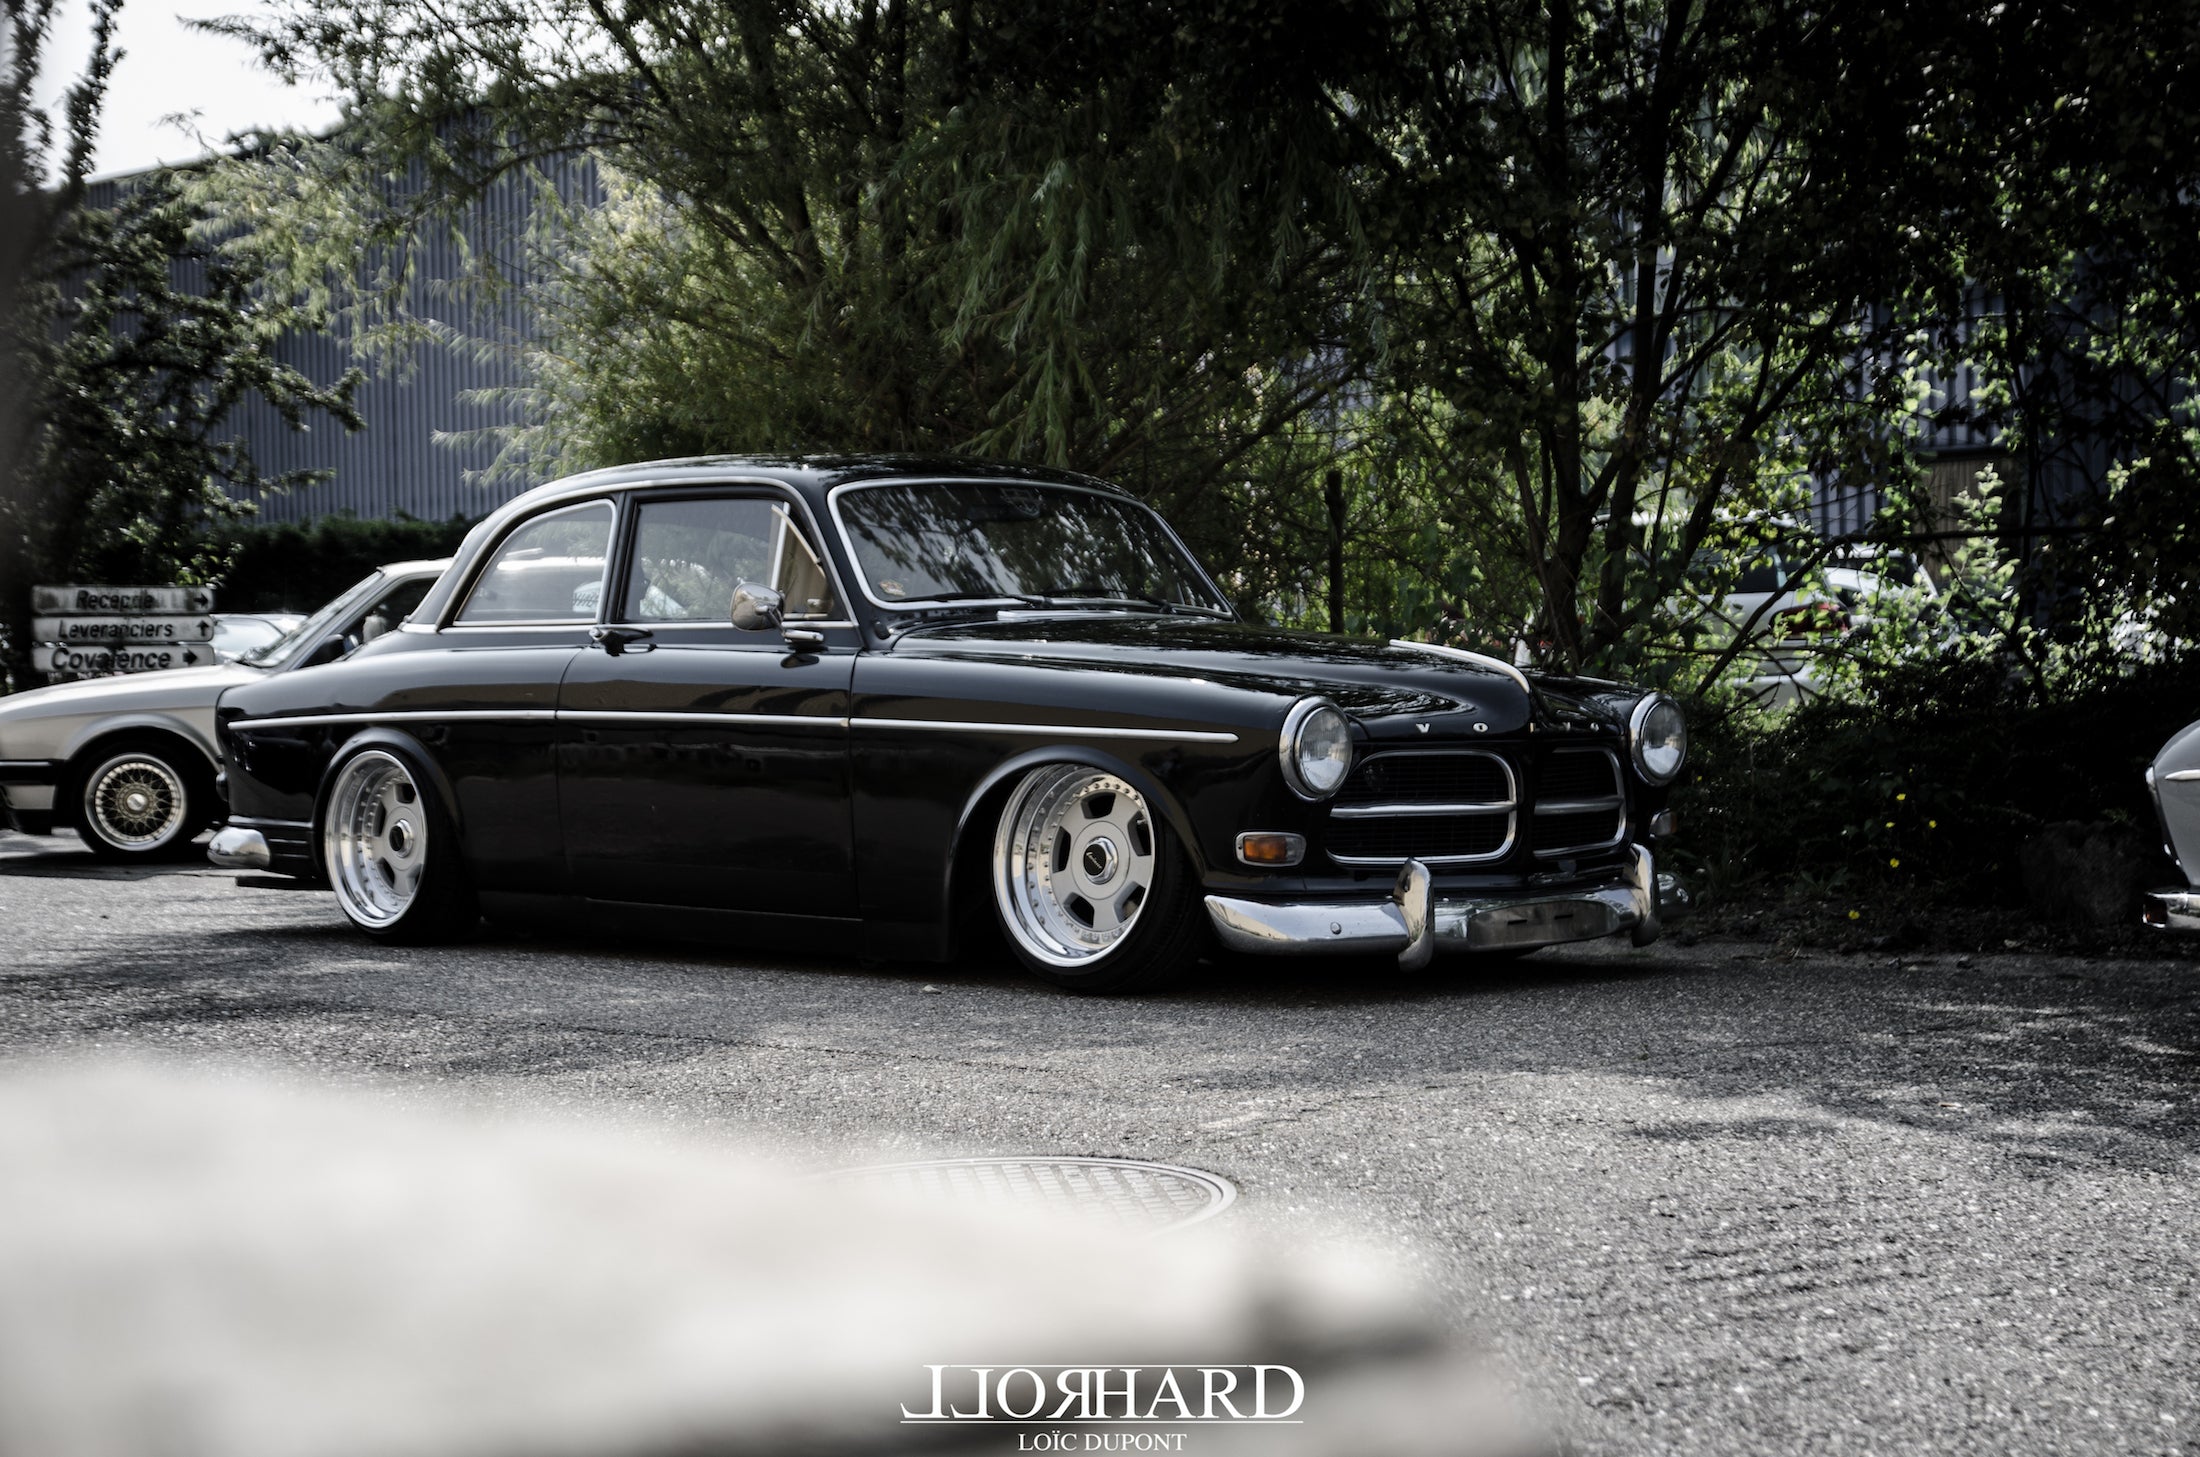 RollHard: The Belgian Chapter.